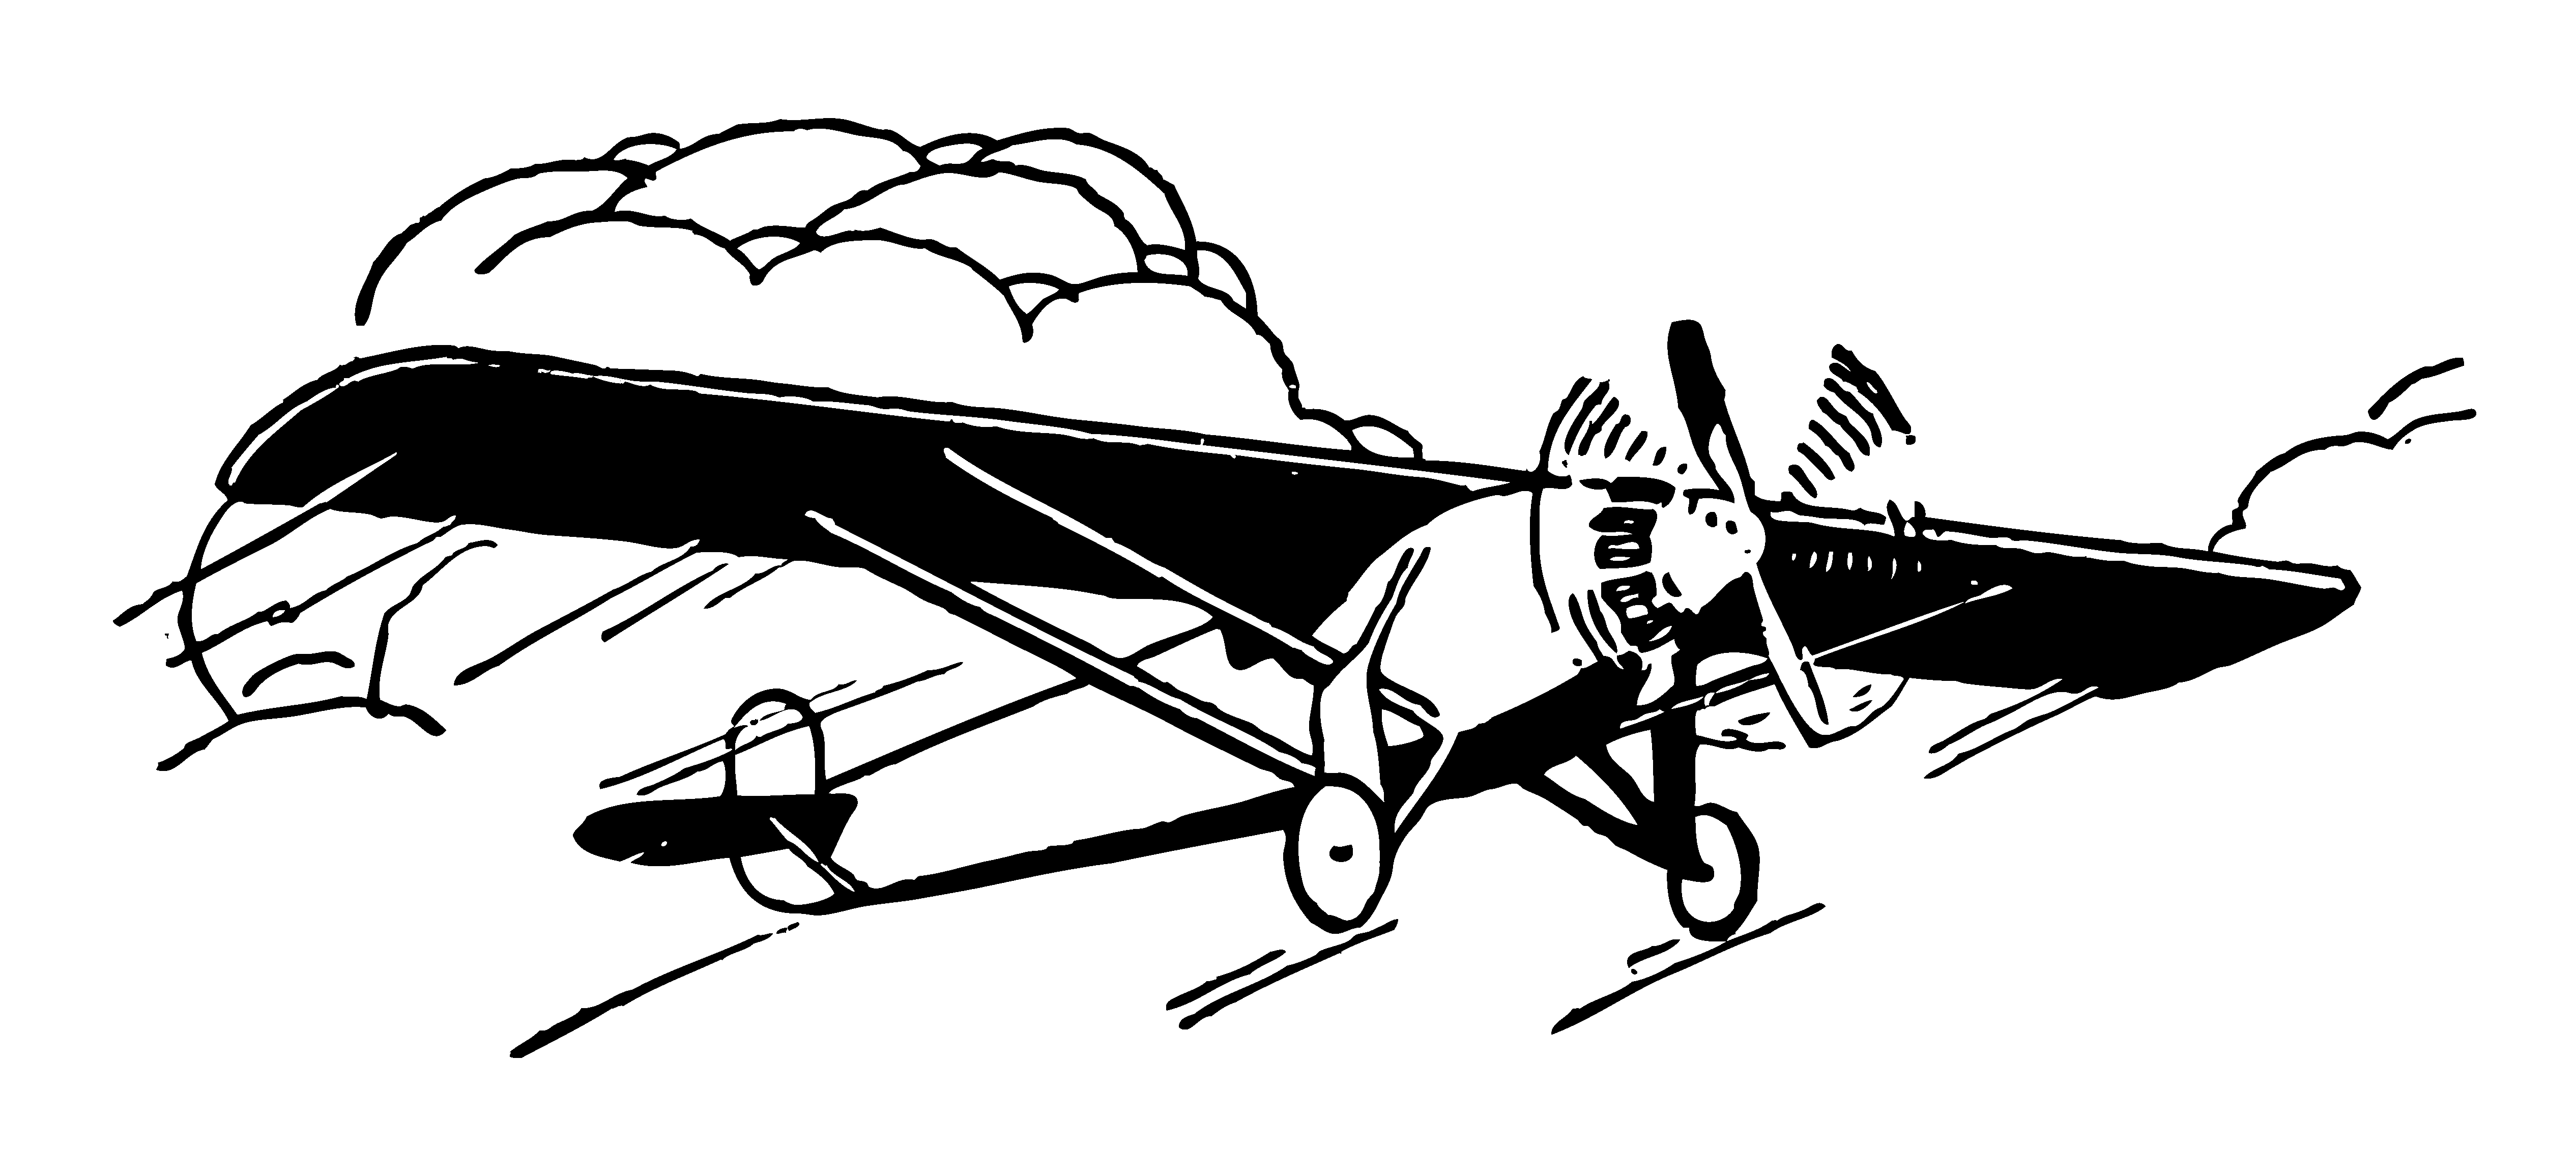 simple old airplane drawing